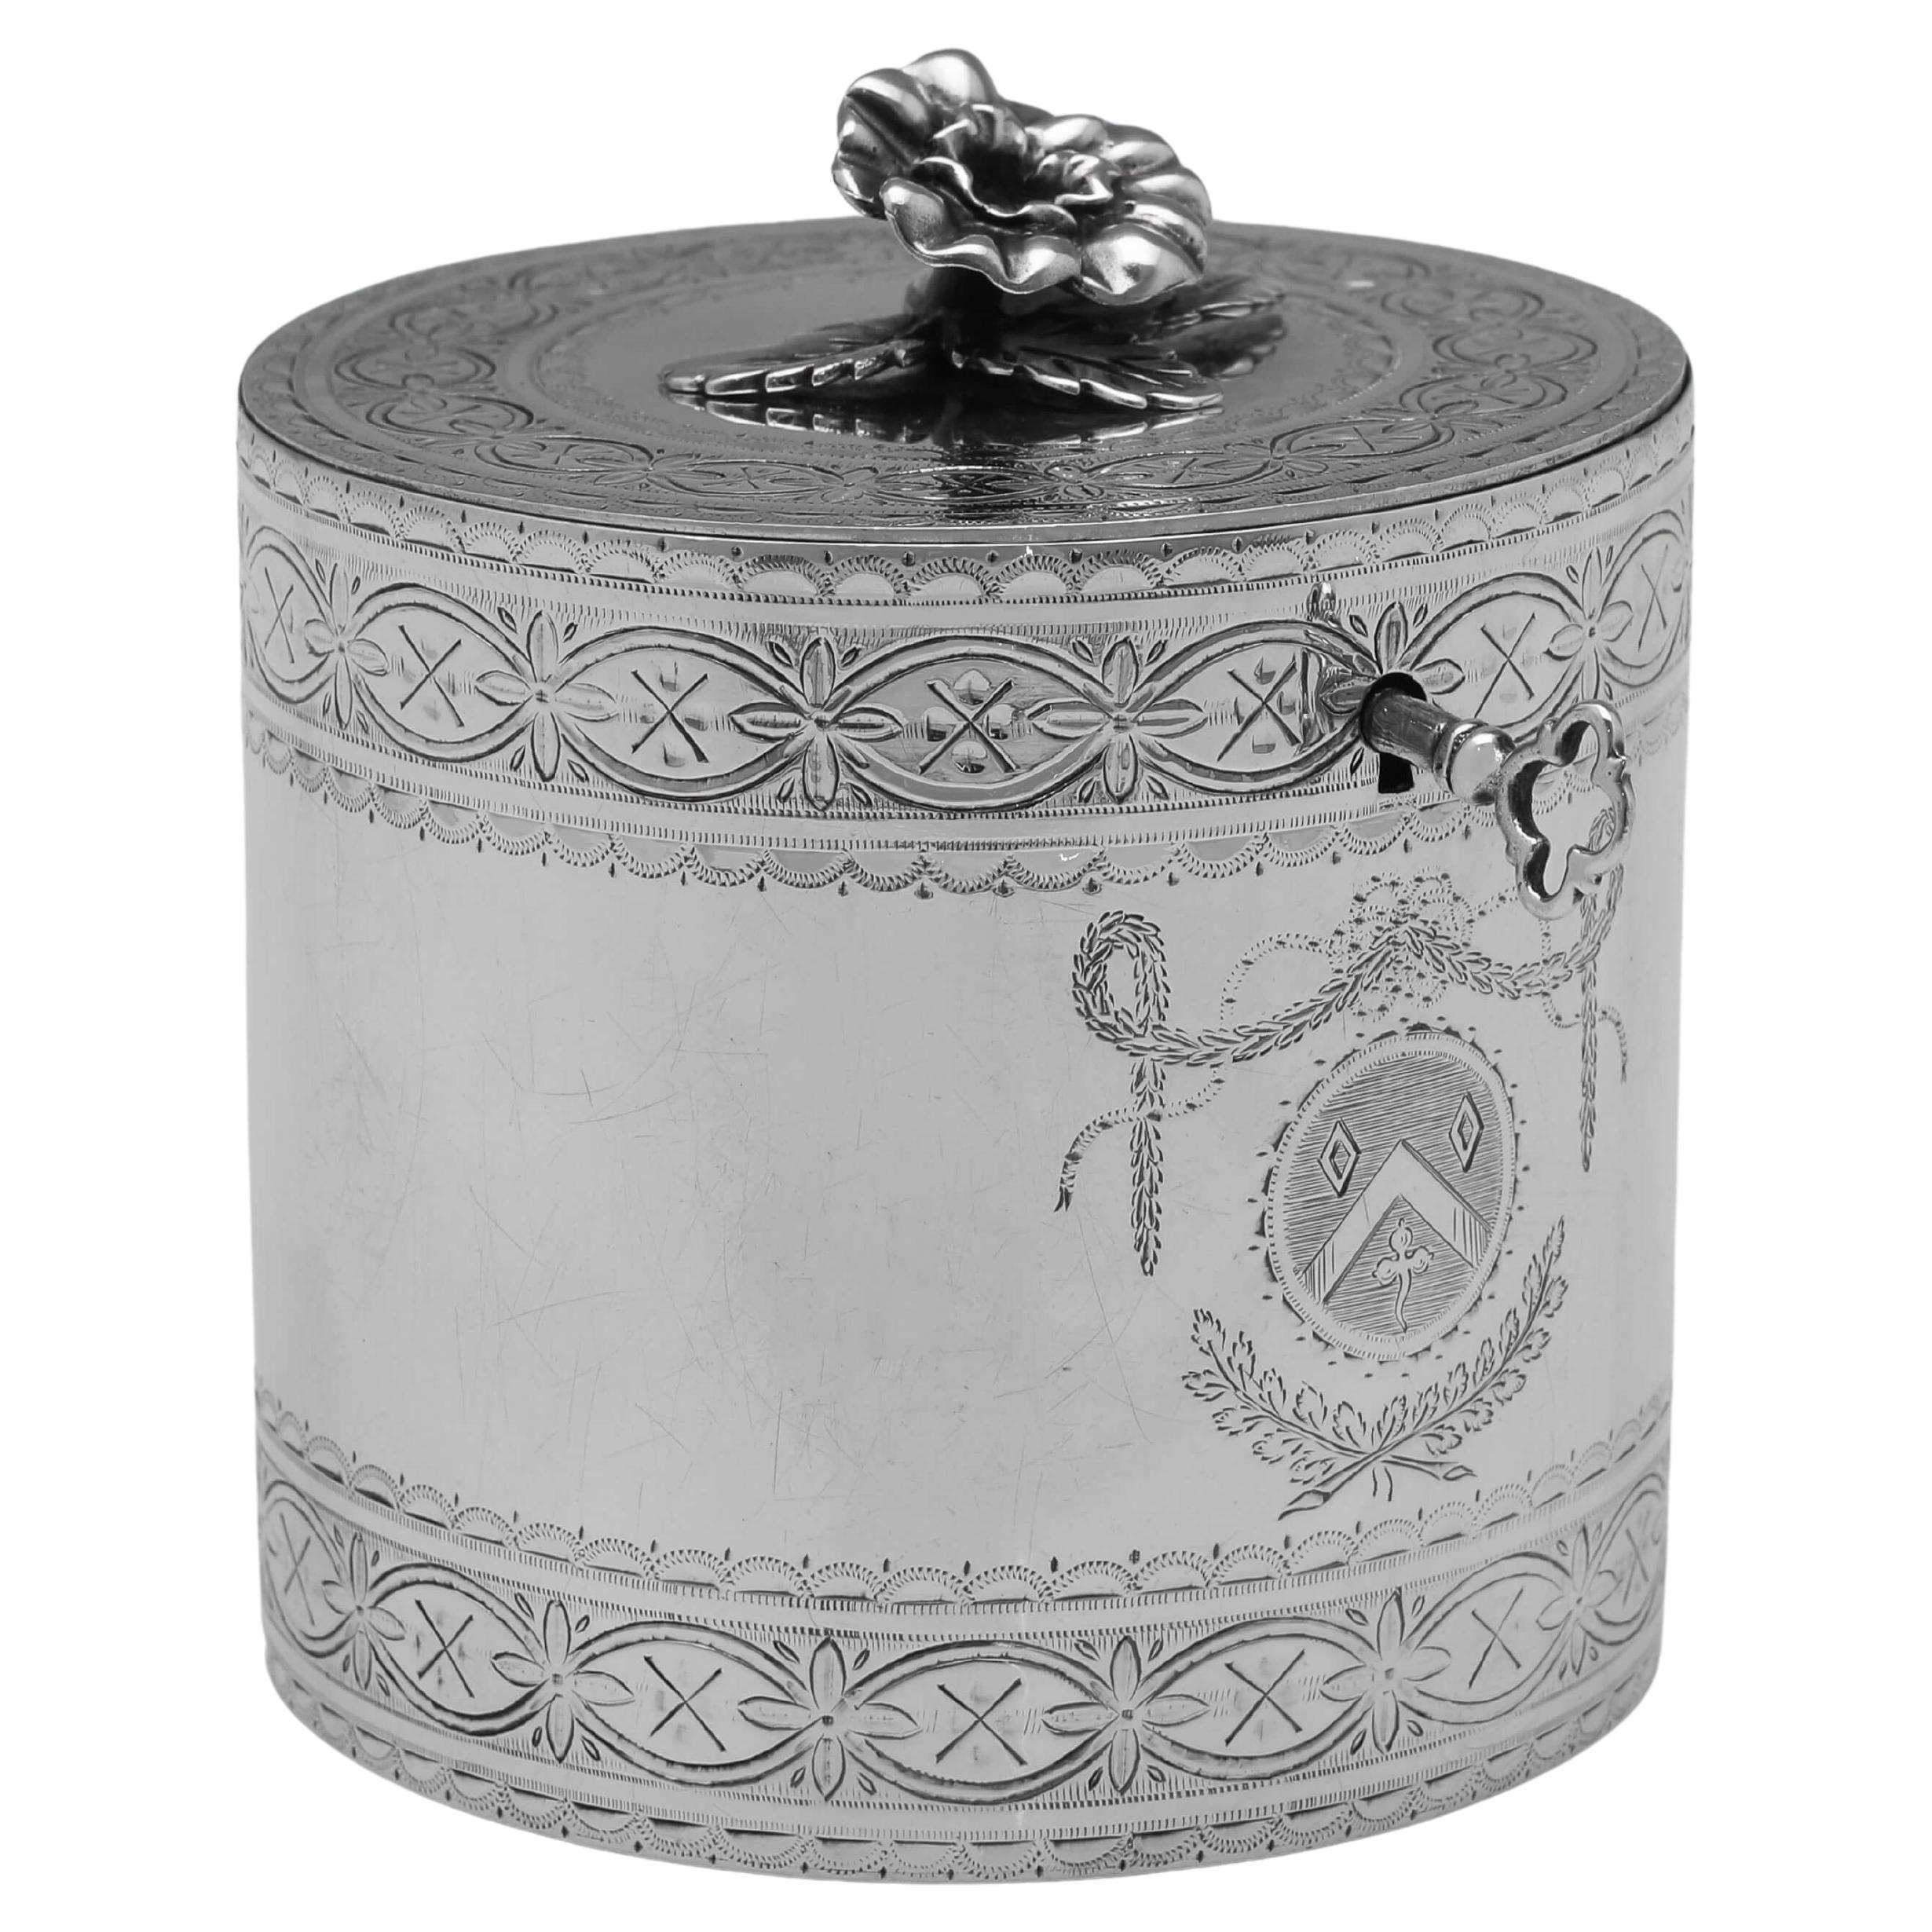 Neoclassical George III Period Antique Sterling Silver Tea Caddy - London 1775